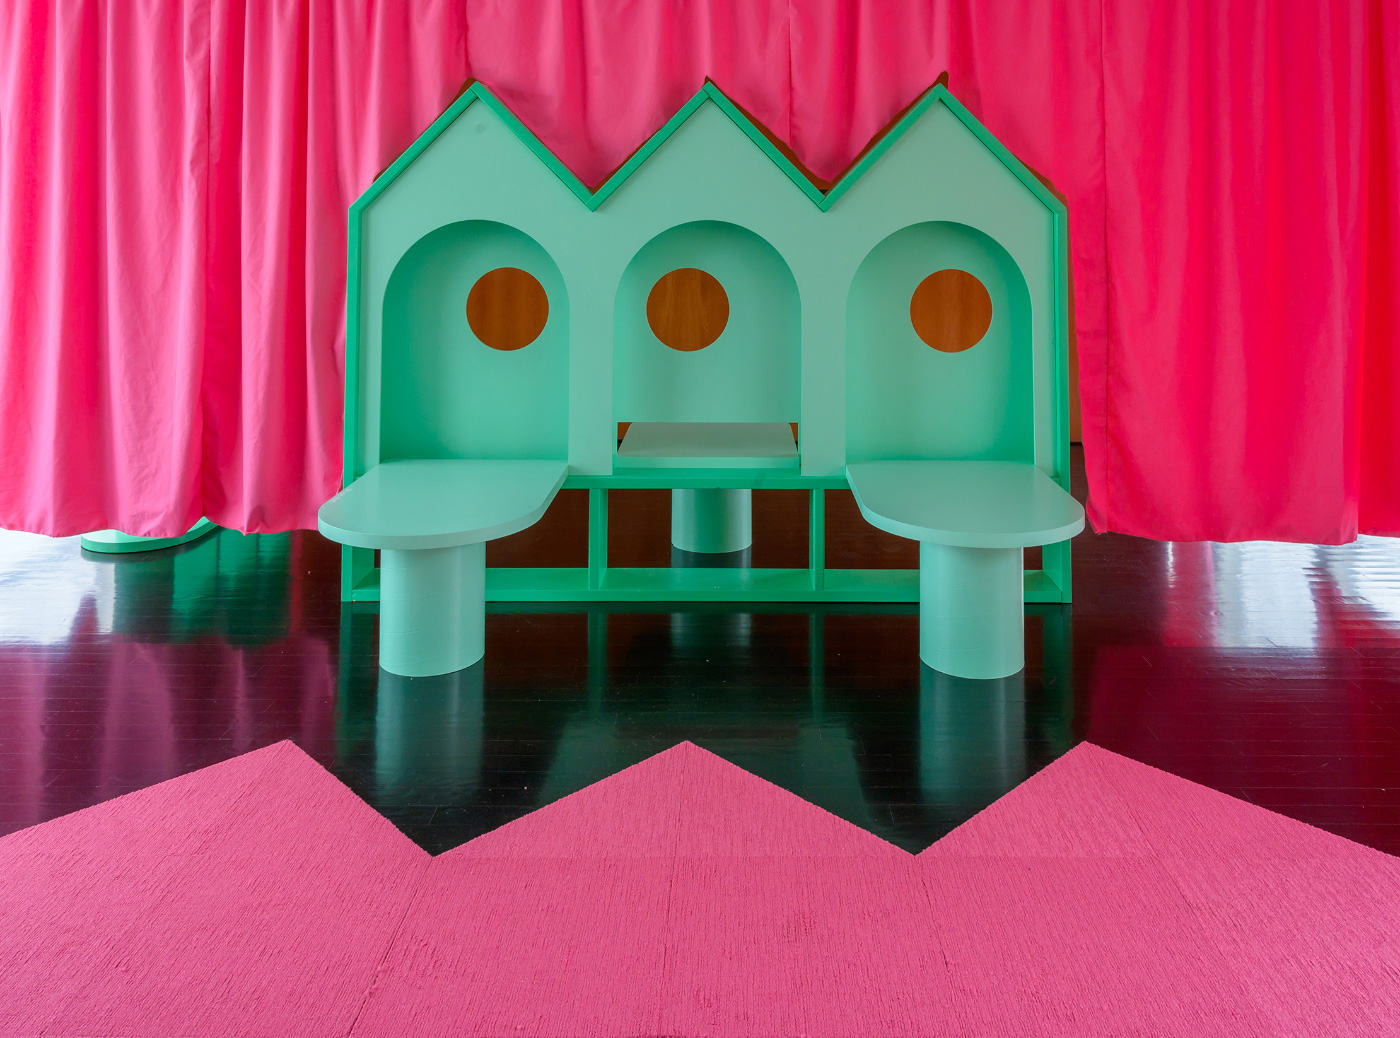 A green house-like piece of furniture in front of a pink curtain